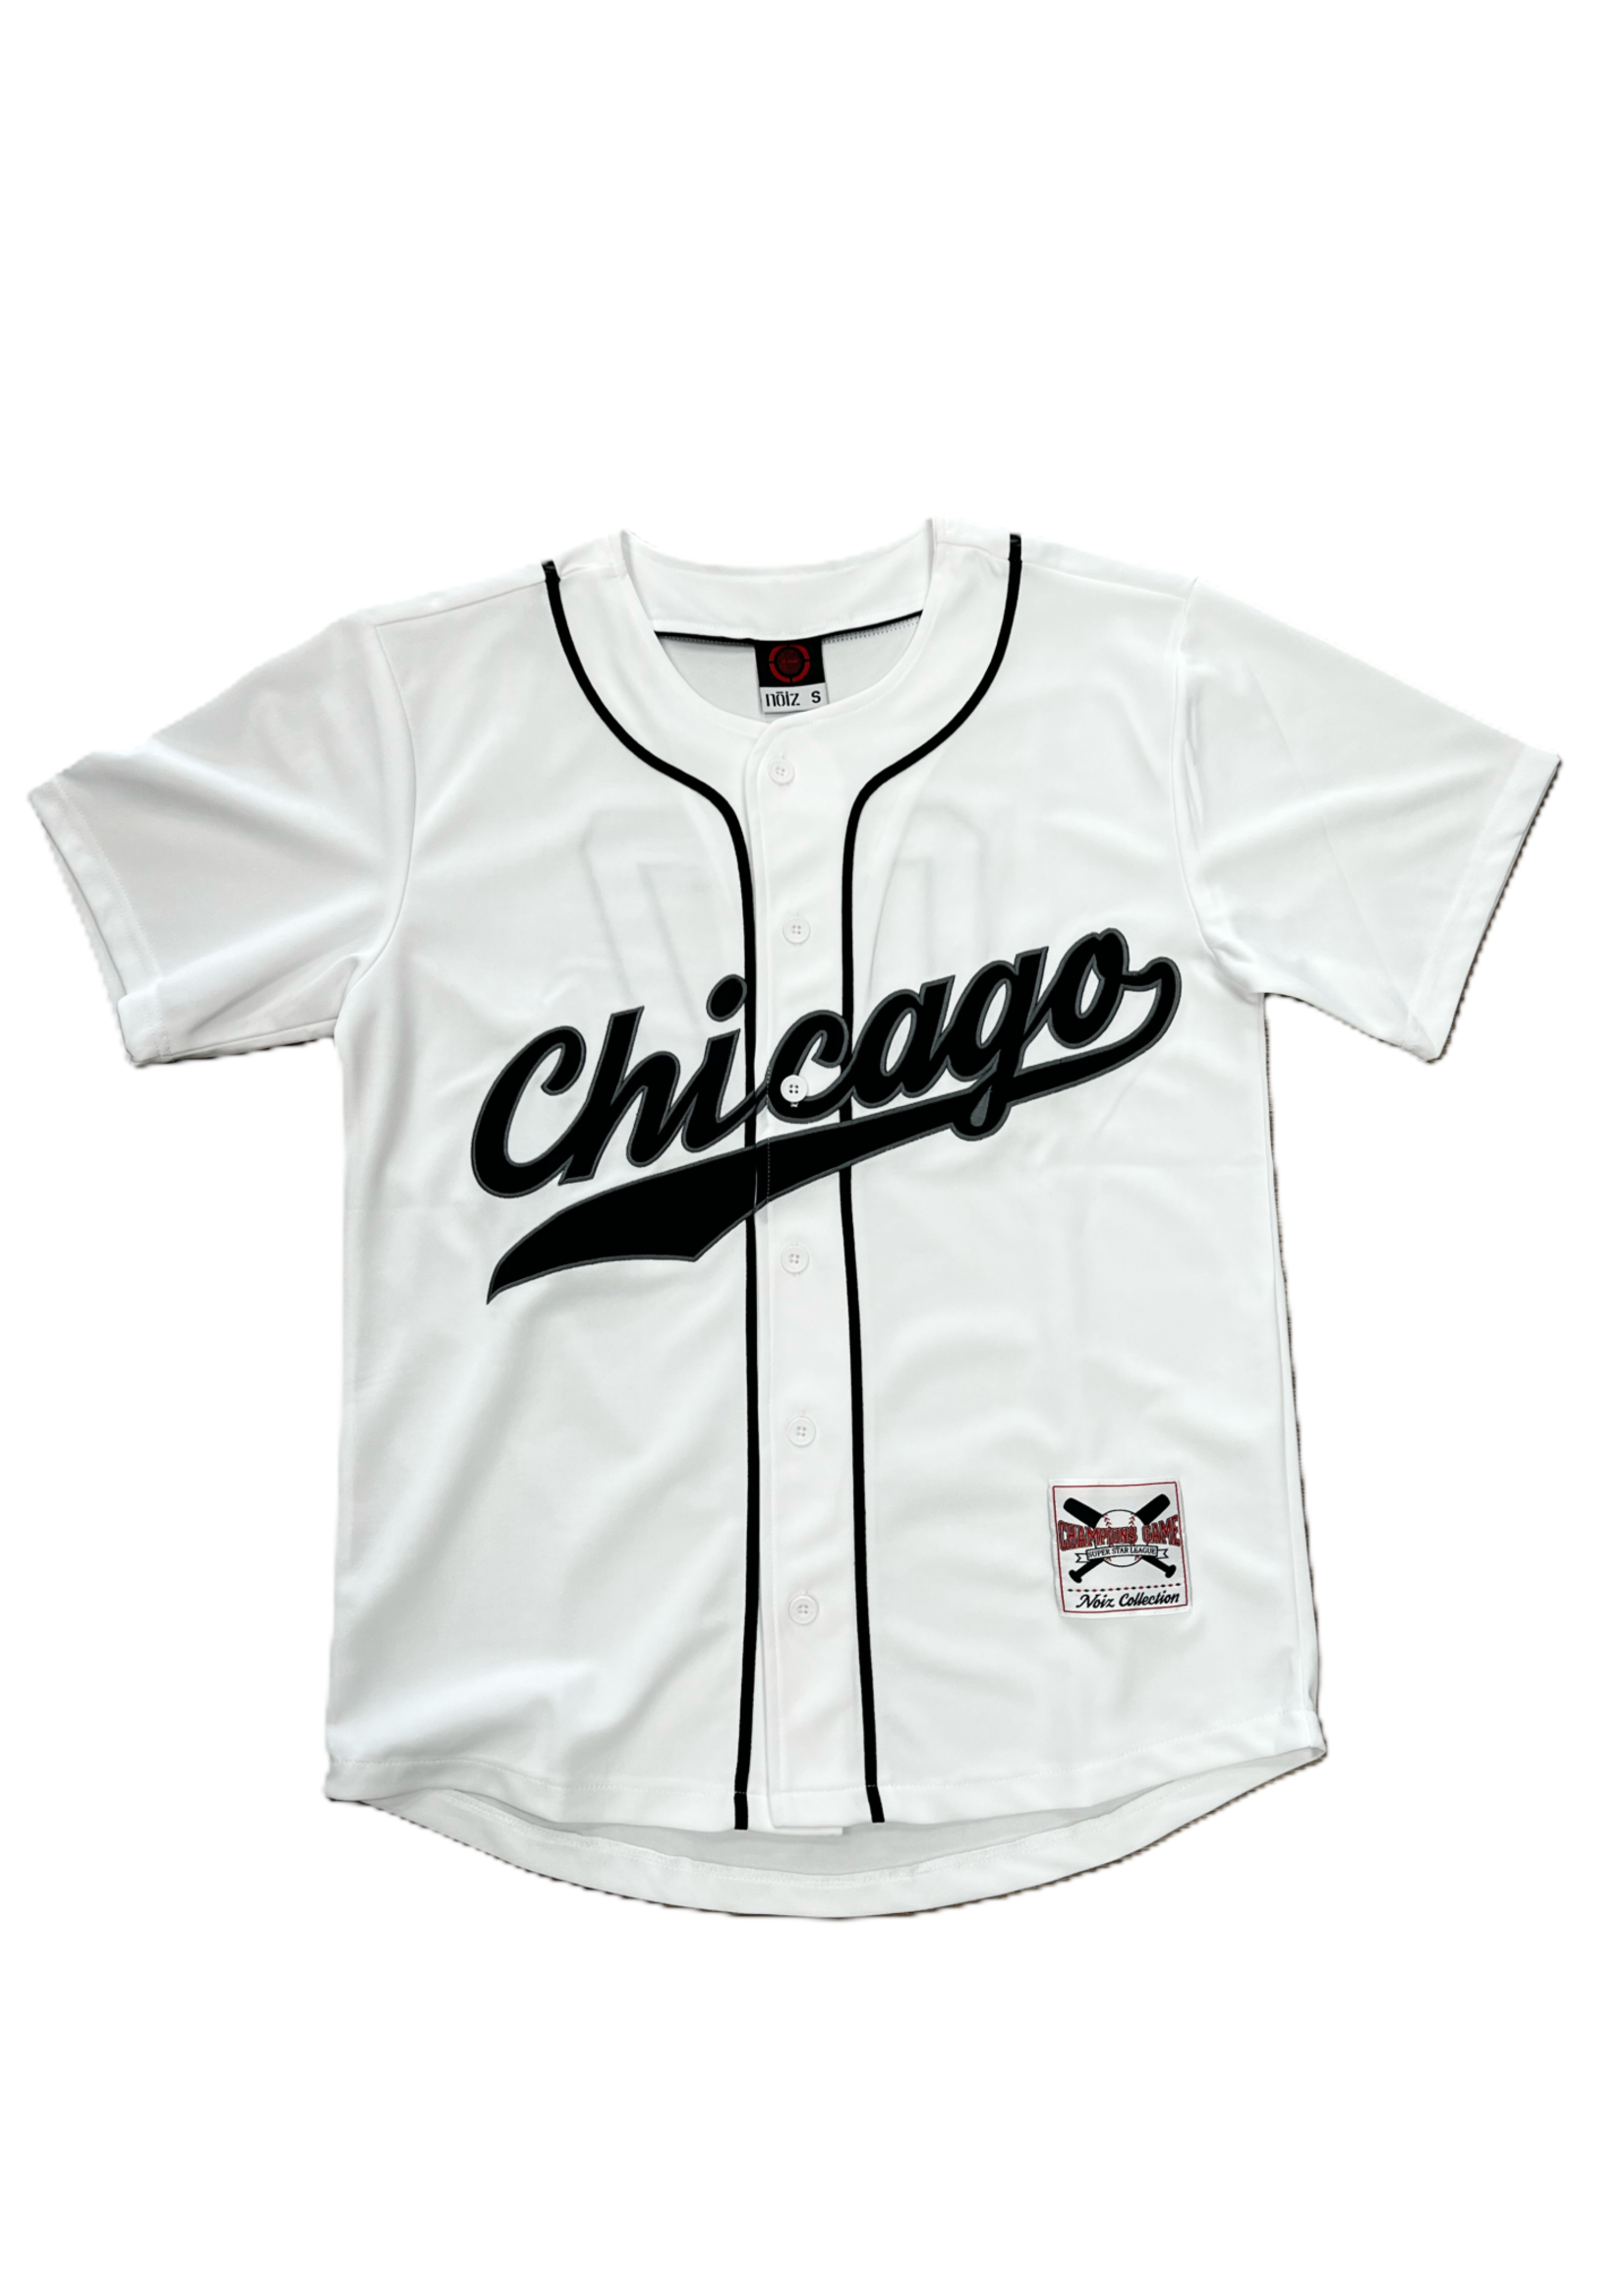 NOIS CHICAGO JERSEY - (White/Red/Black)